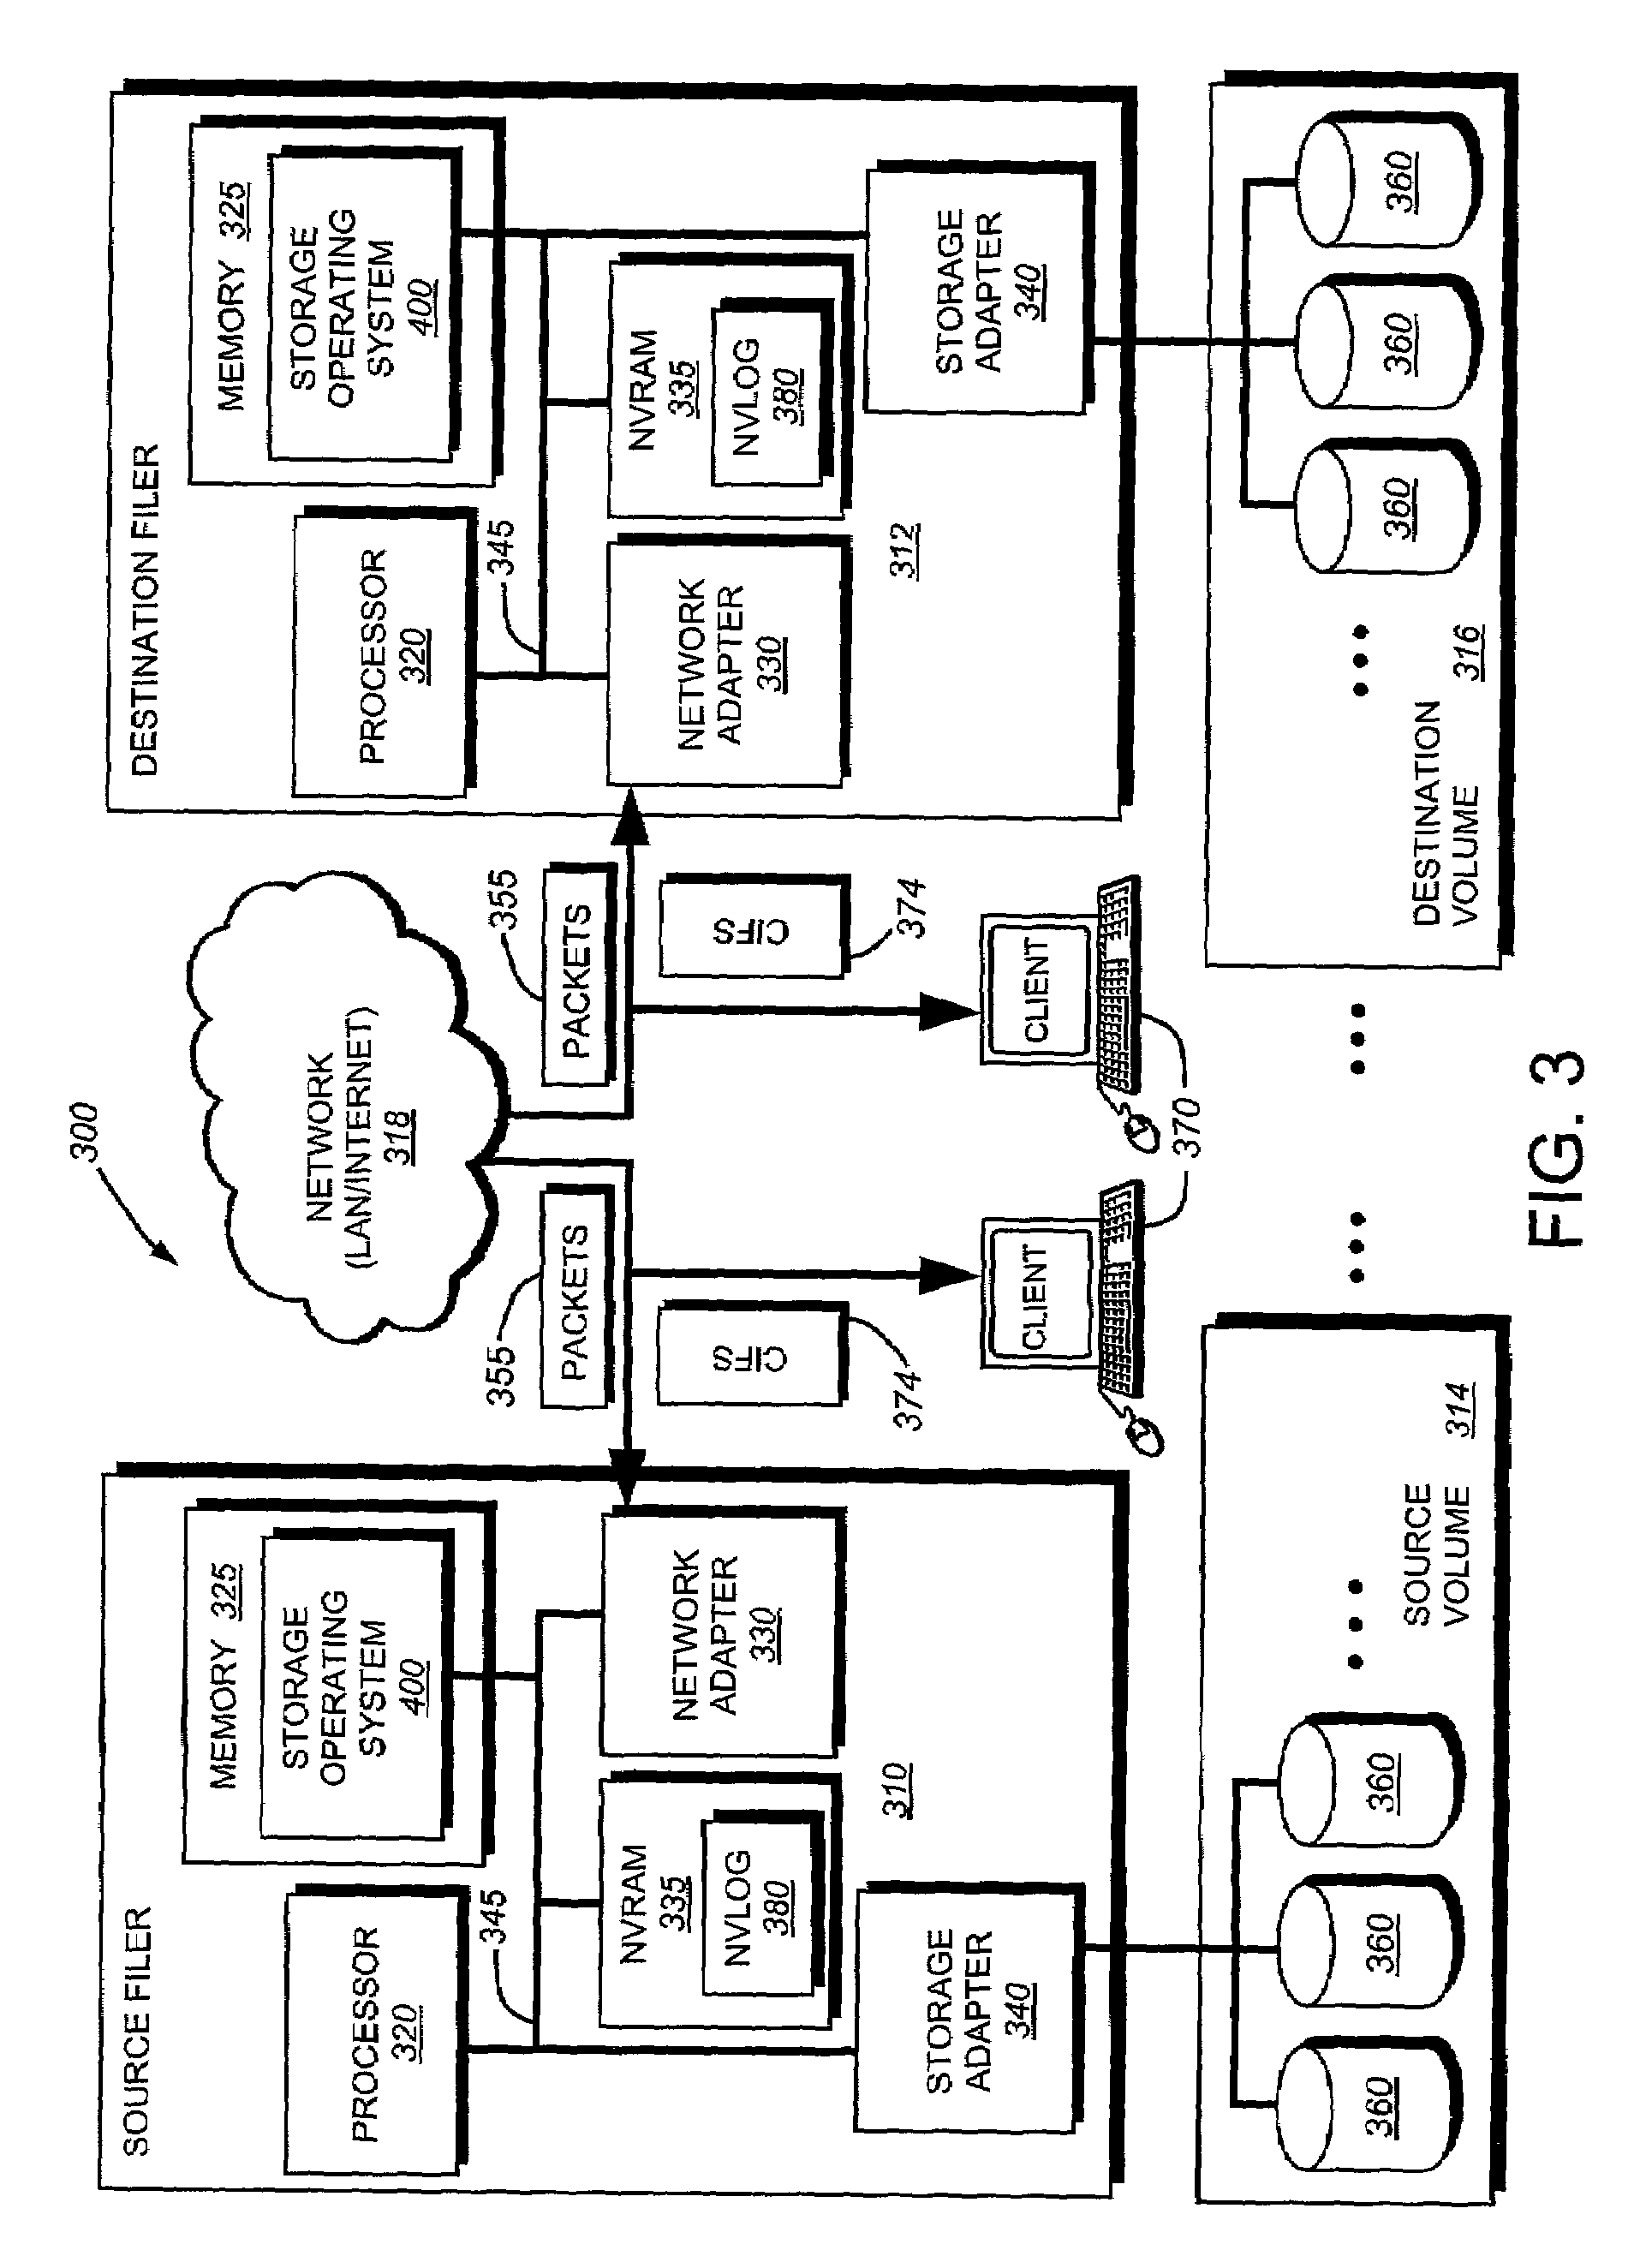 System and method for storage of snapshot metadata in a remote file